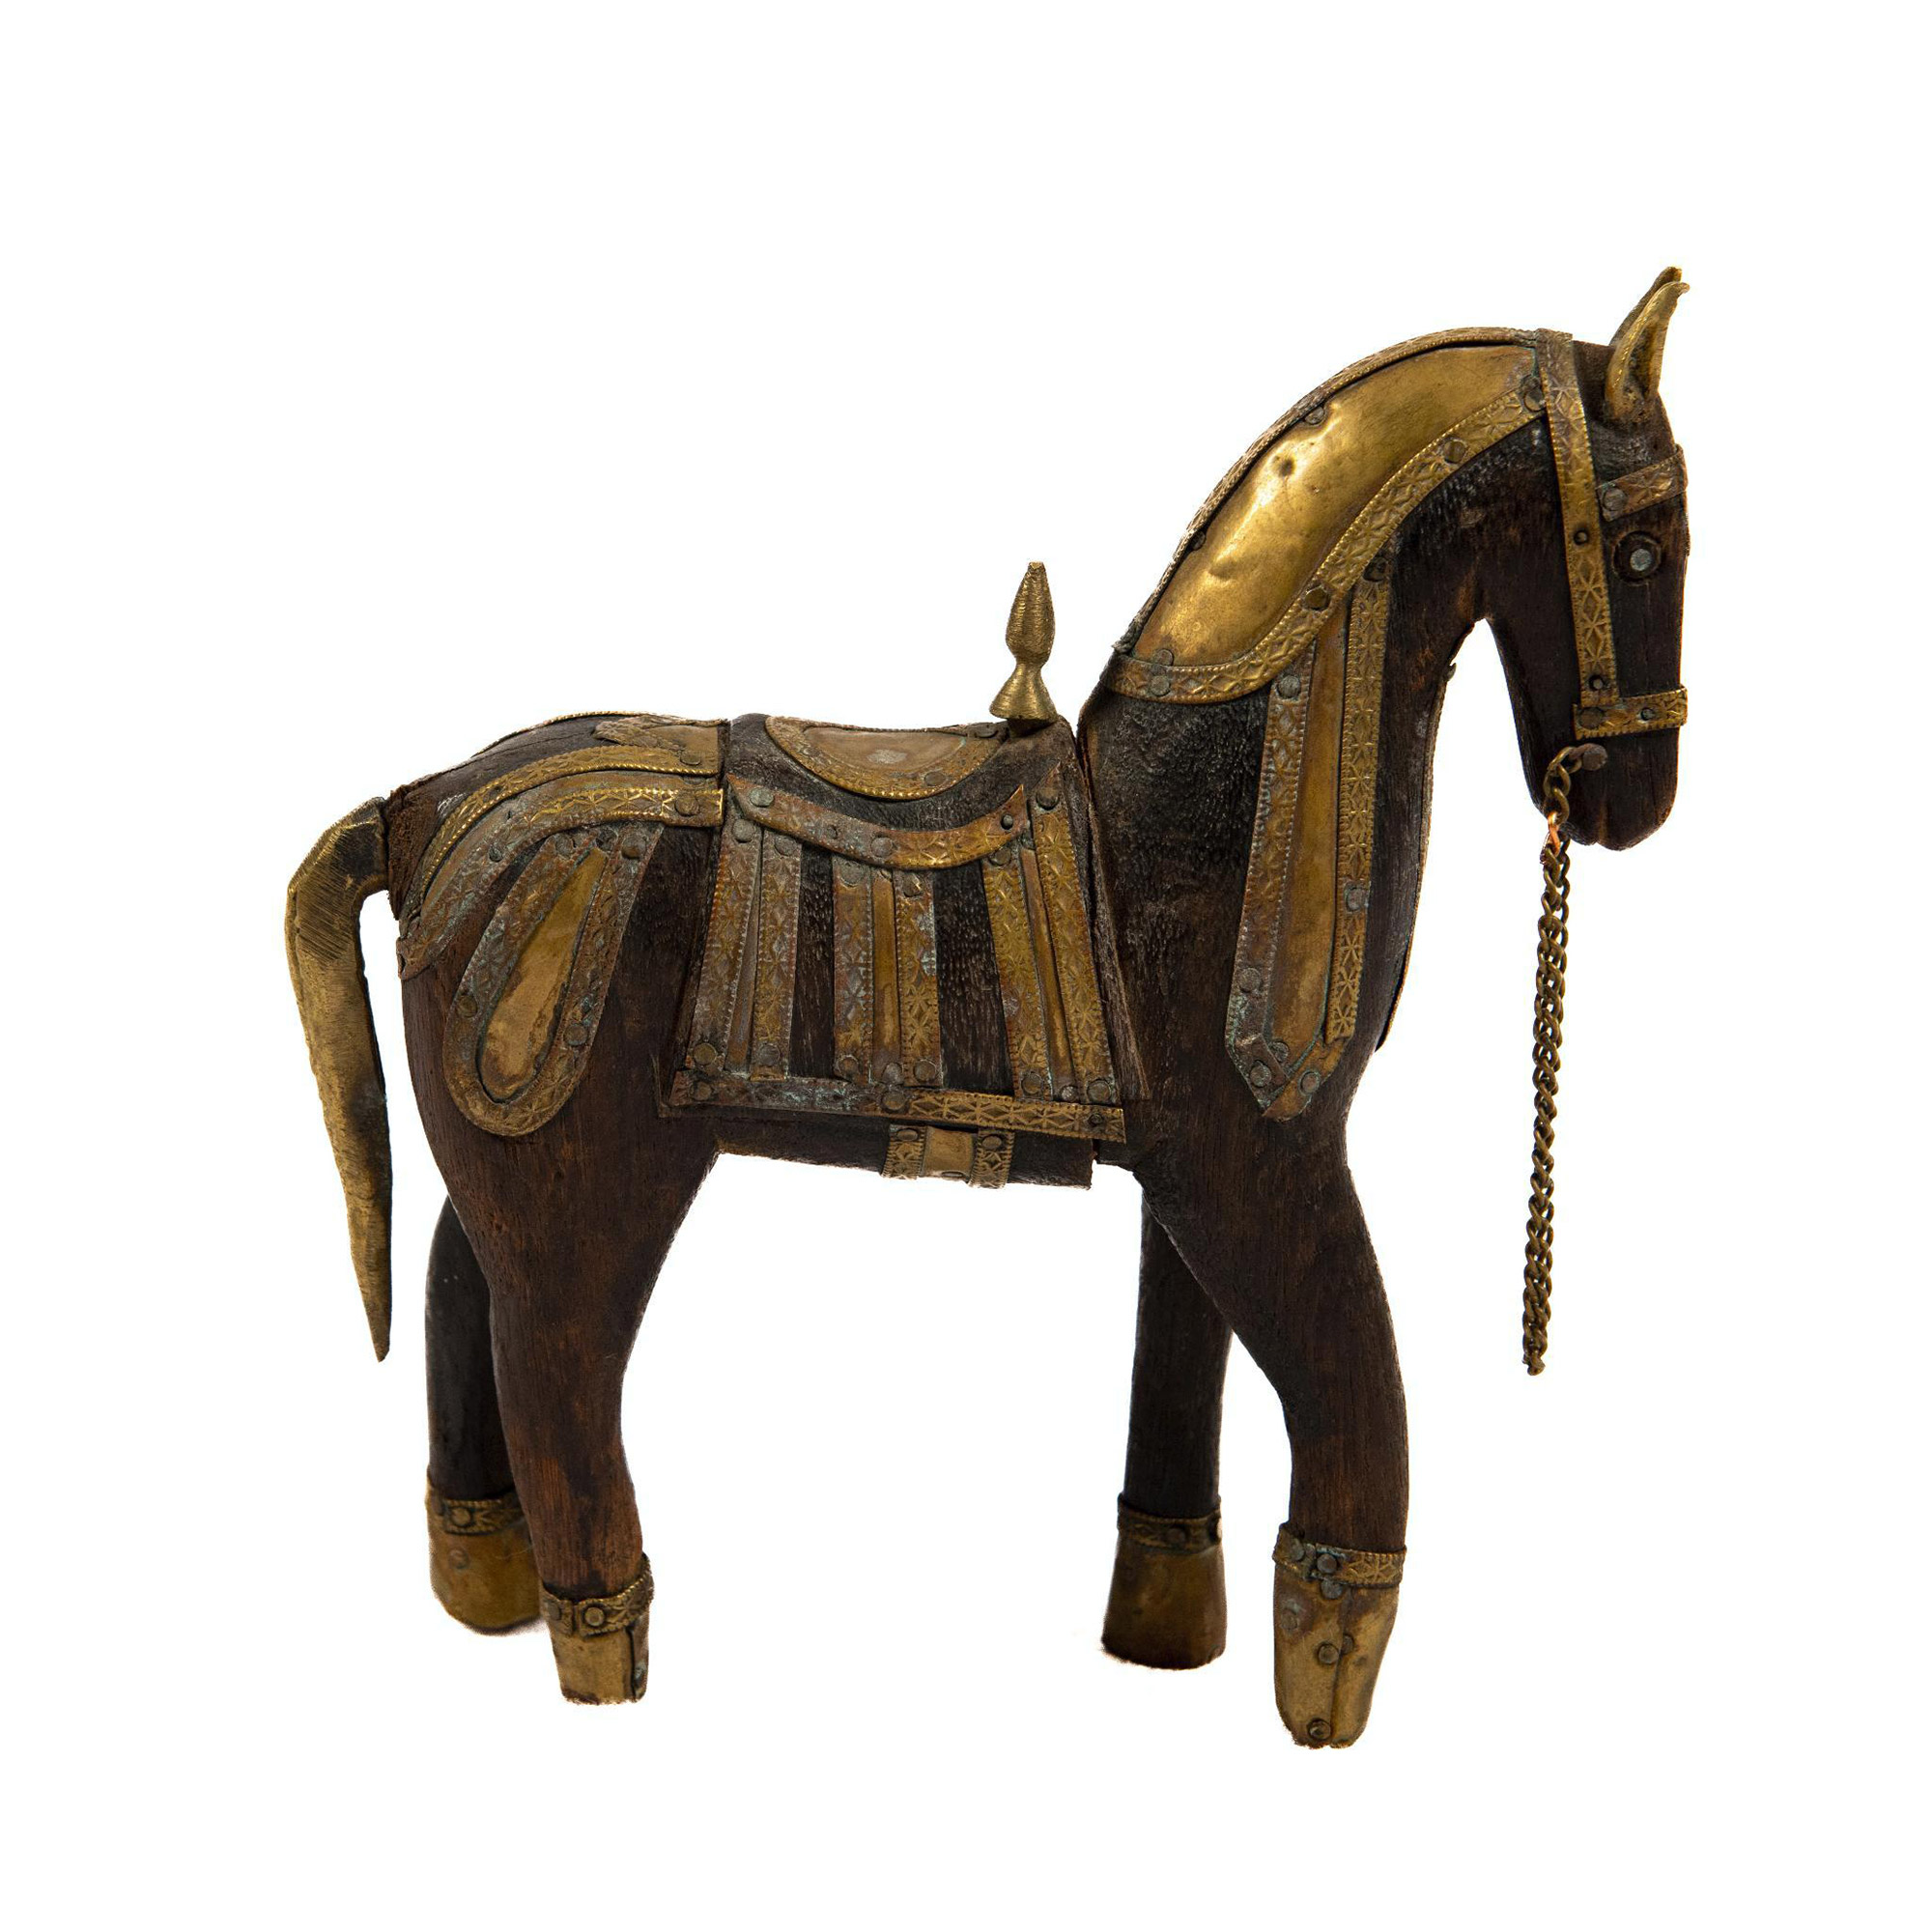 Rajasthani Wooden War Horse with Brass Accents - Image 3 of 4